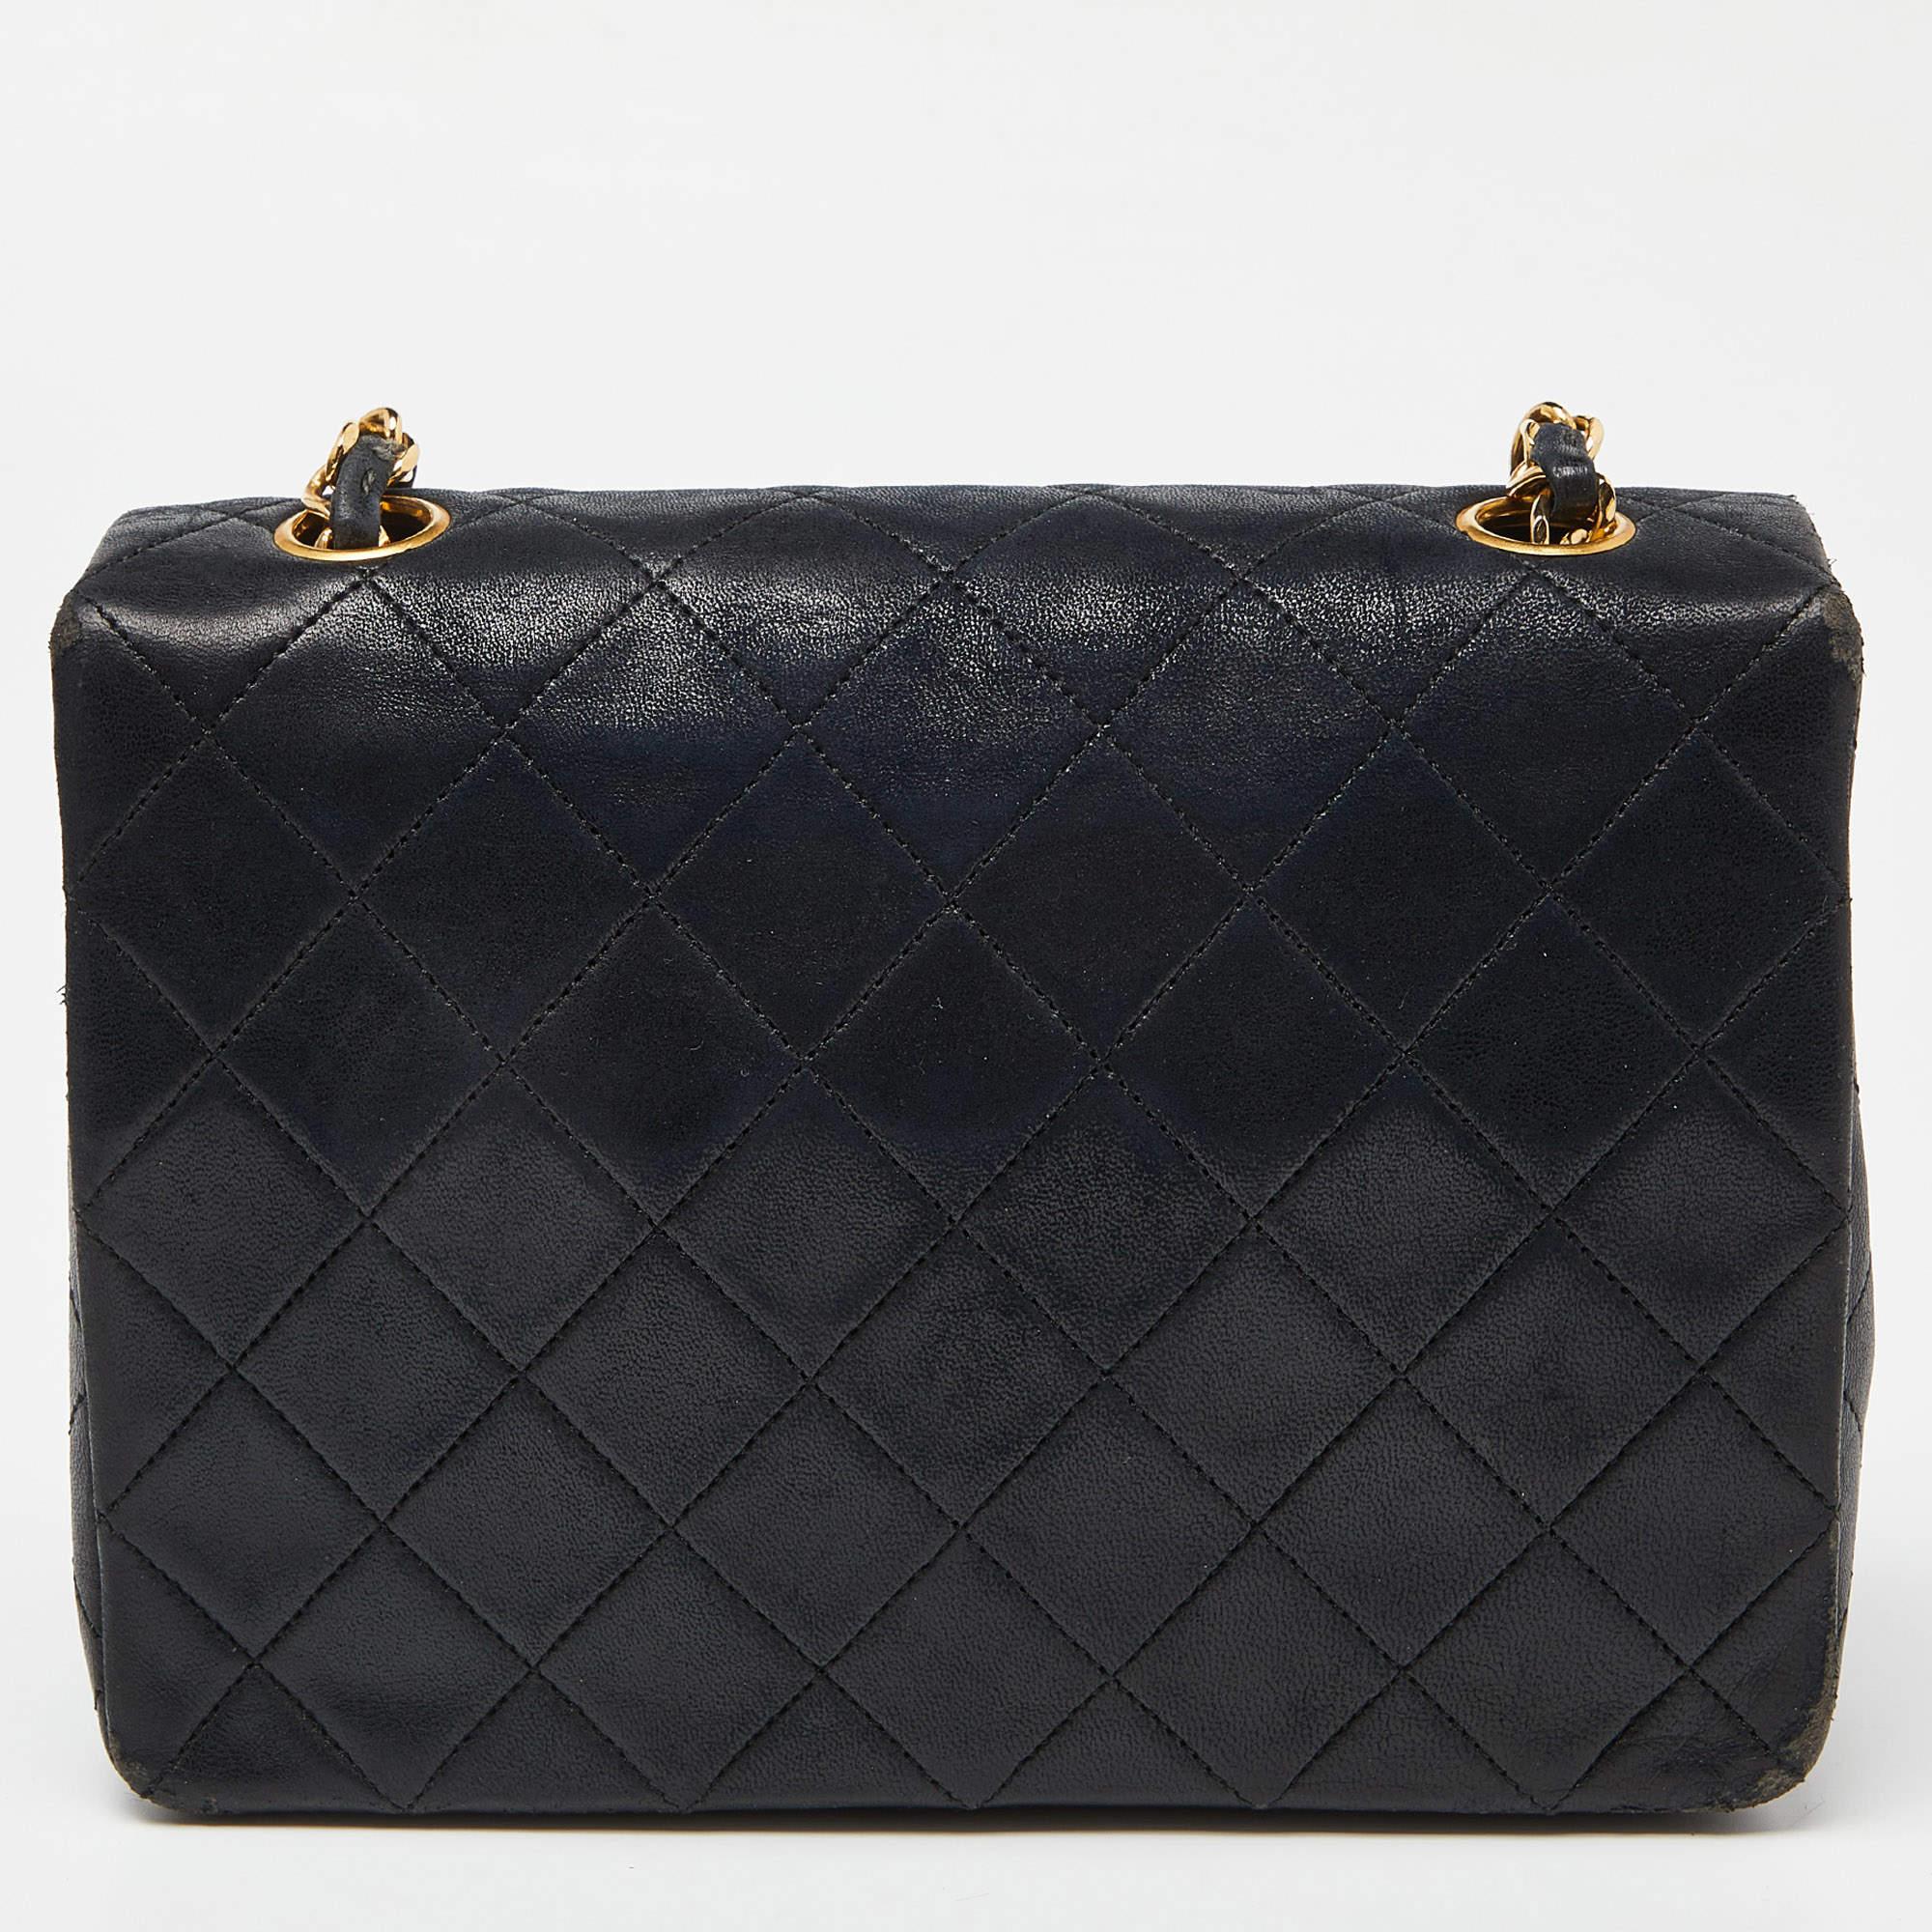 Chanel's luxurious flap bag is a must-have in a well-curated wardrobe! This stunning bag has a masterfully crafted leather exterior with gold-tone hardware and the iconic CC logo on the front. This Chanel vintage flap bag is complete with a sturdy